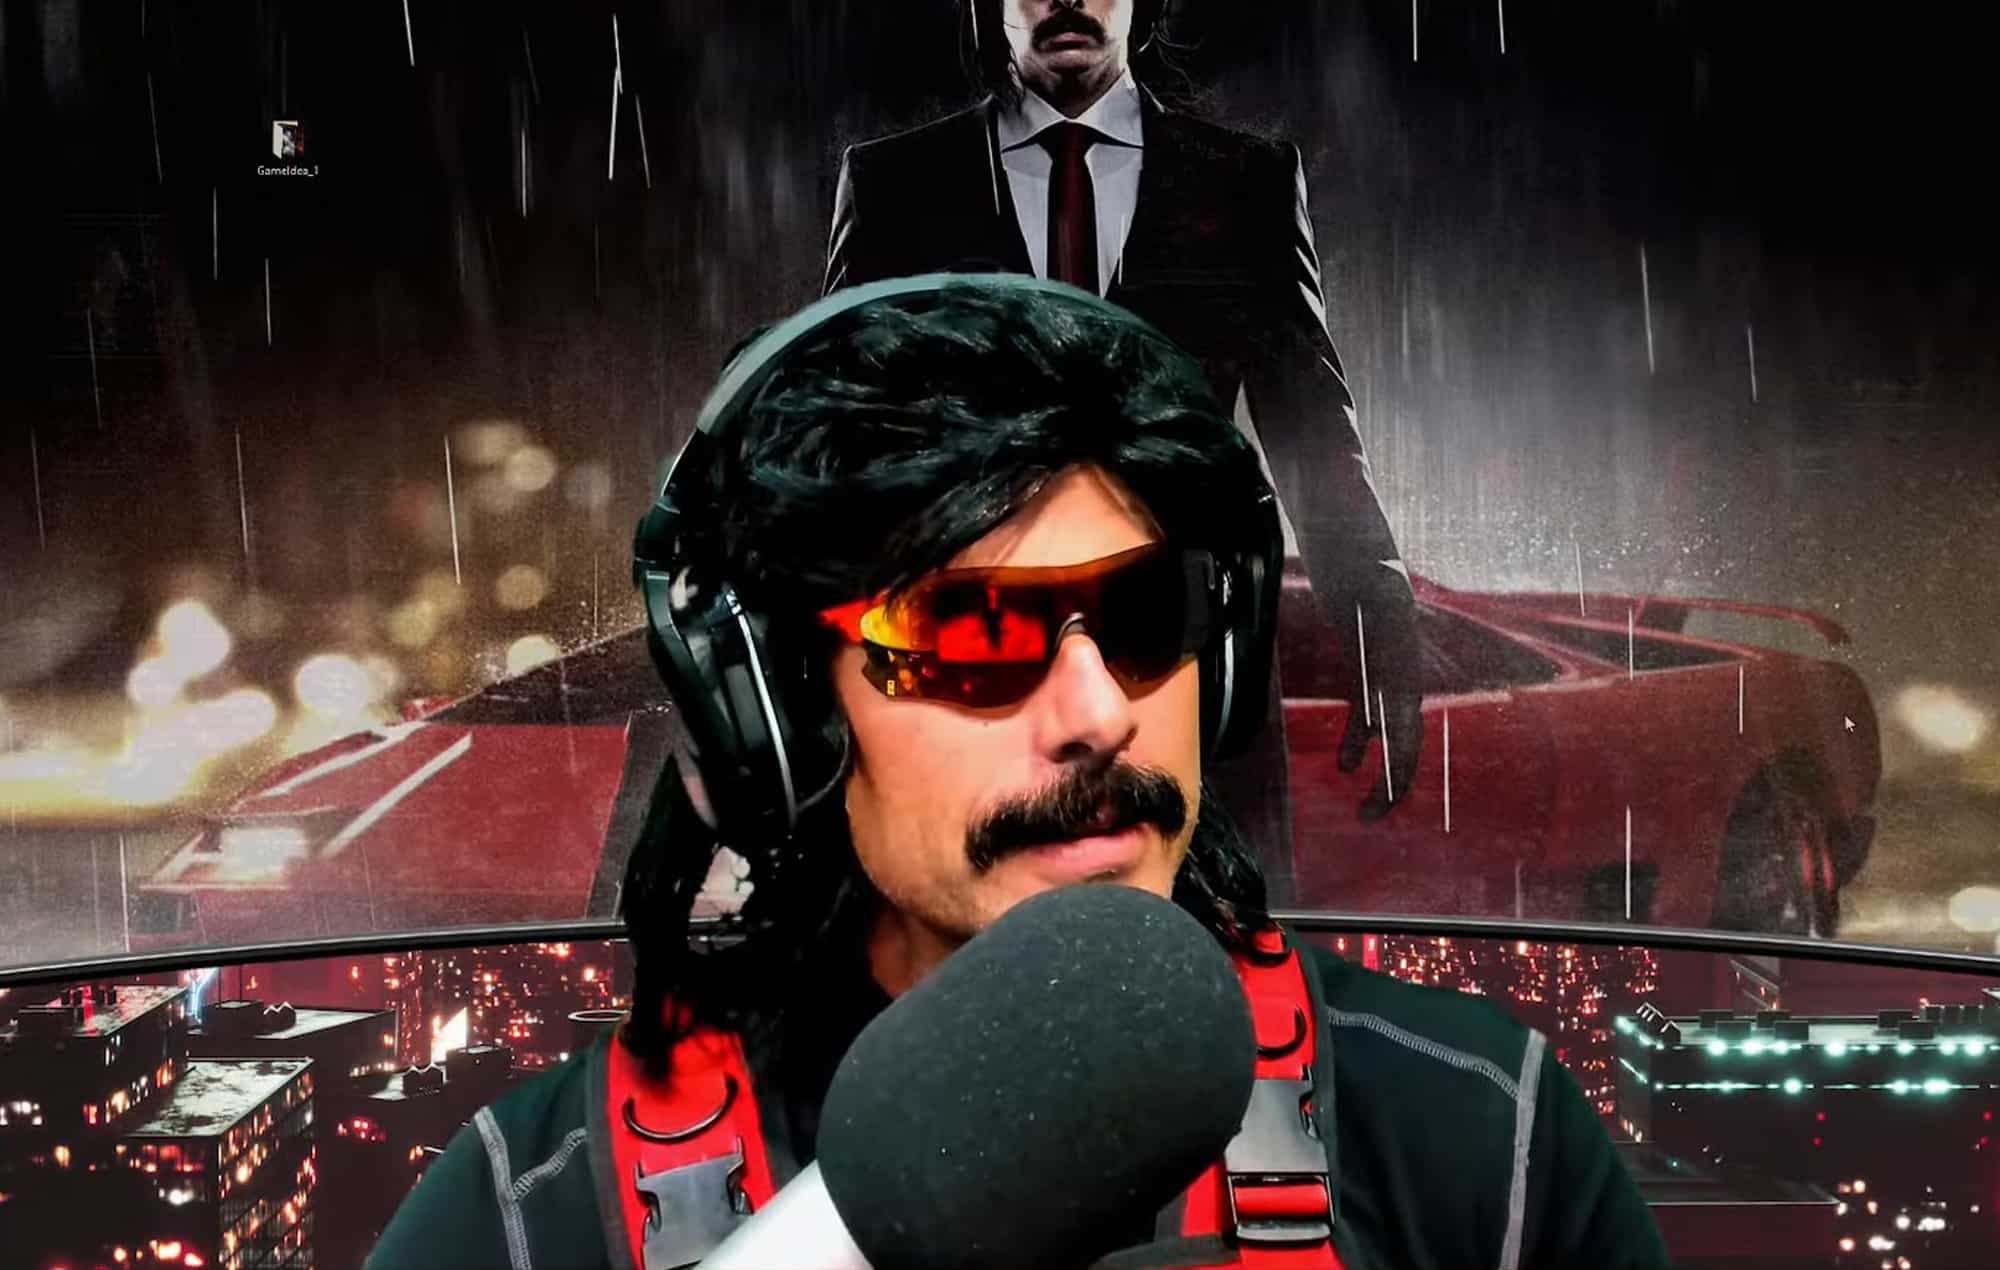 Dr Disrespect join PUBG Mobile 13 Days of Halloween